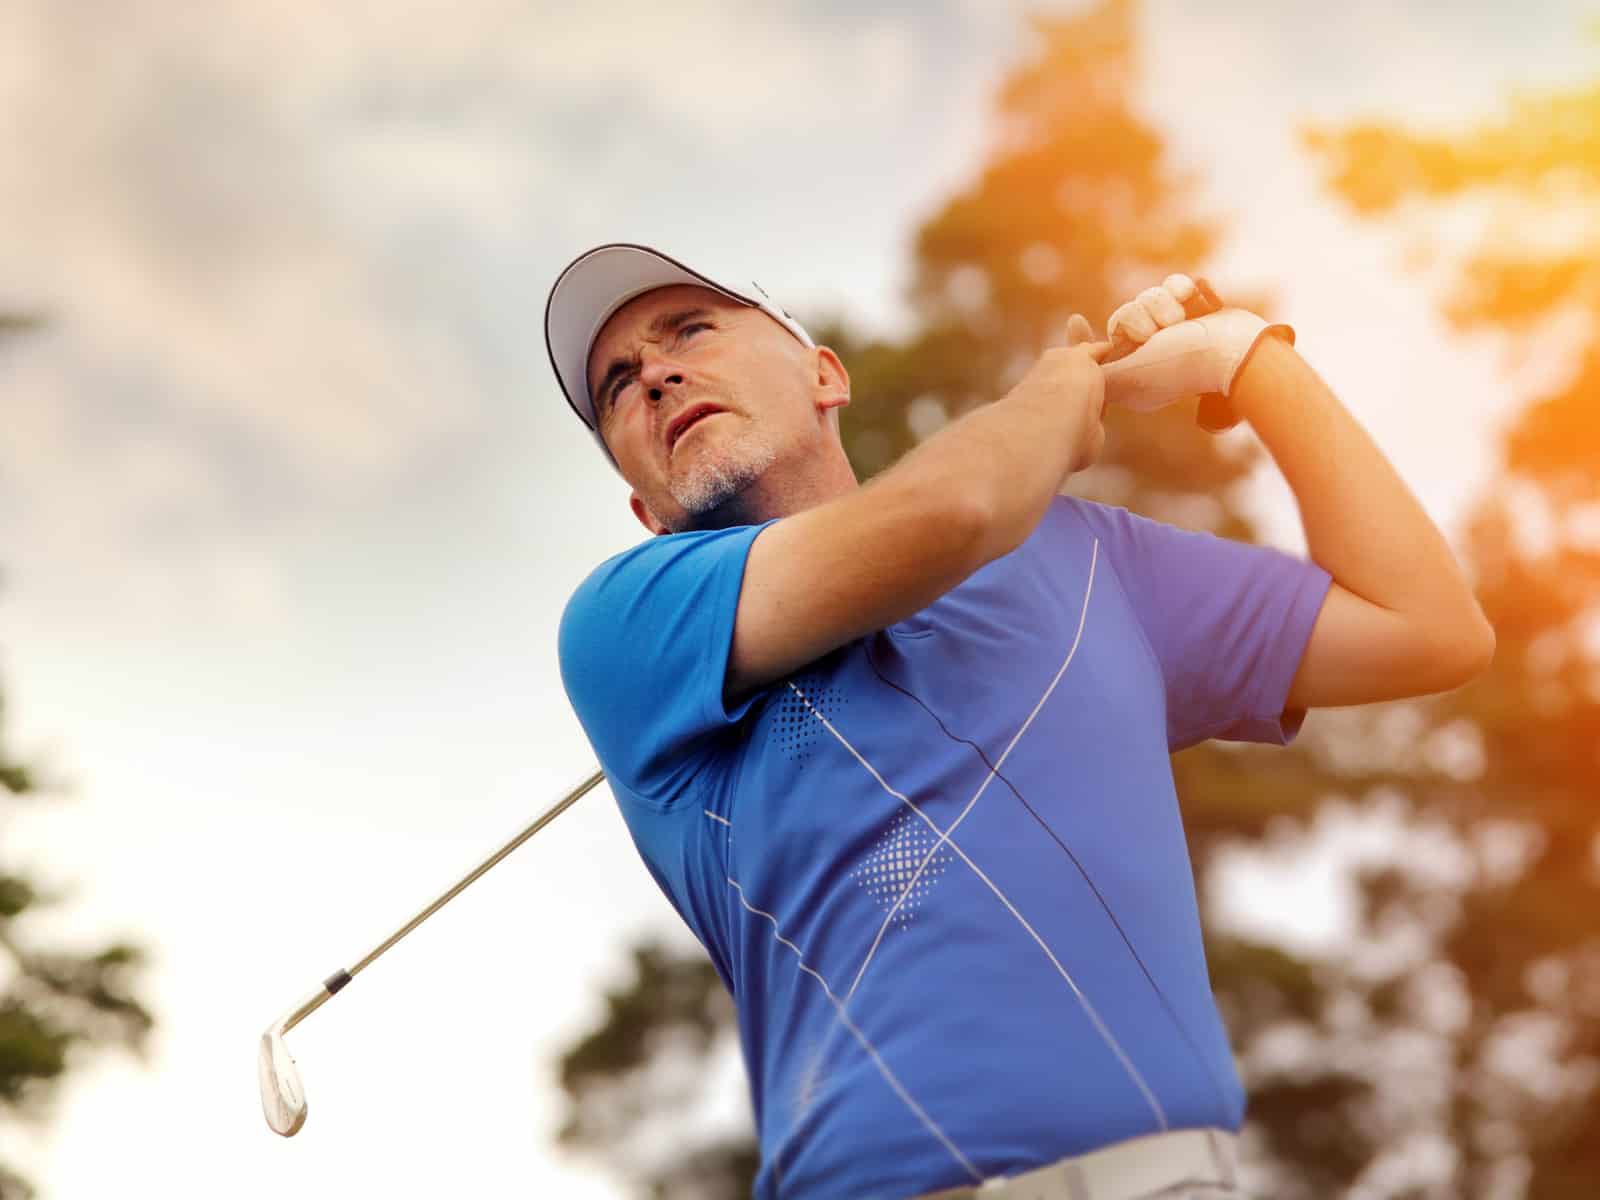 Consistent Golf Swing: 15 Tips for More Consistency in Your Game